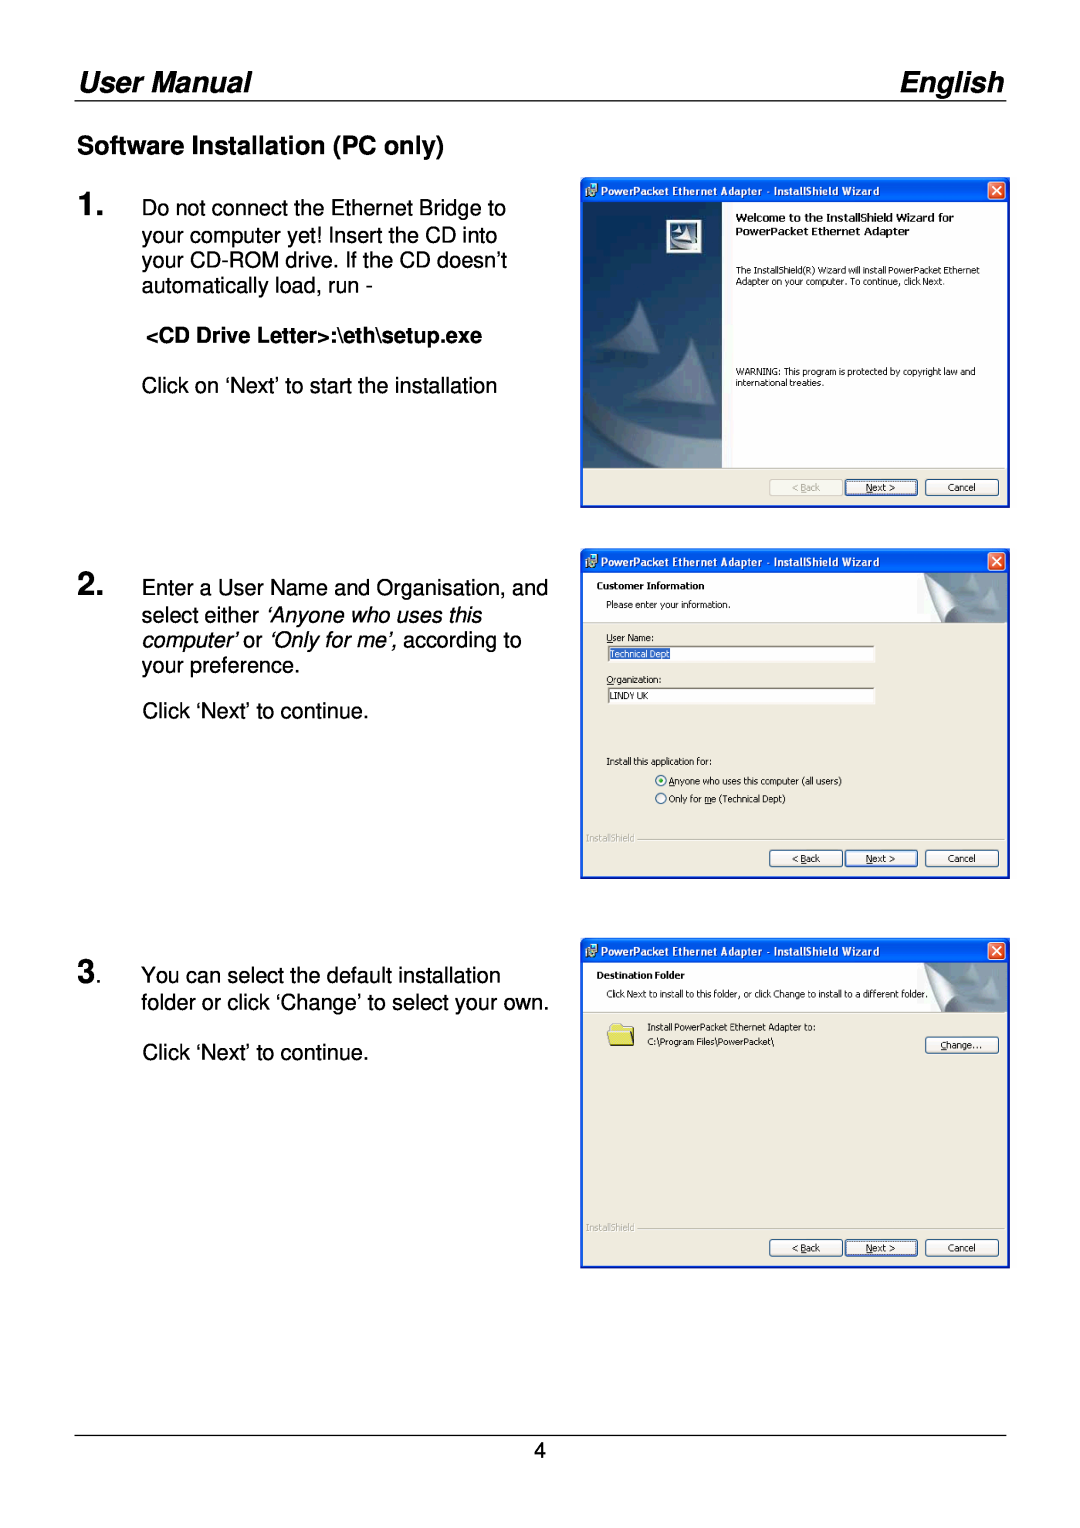 Lindy 25130 user manual Software Installation PC only, CD Drive Letter\eth\setup.exe, User Manual, English 